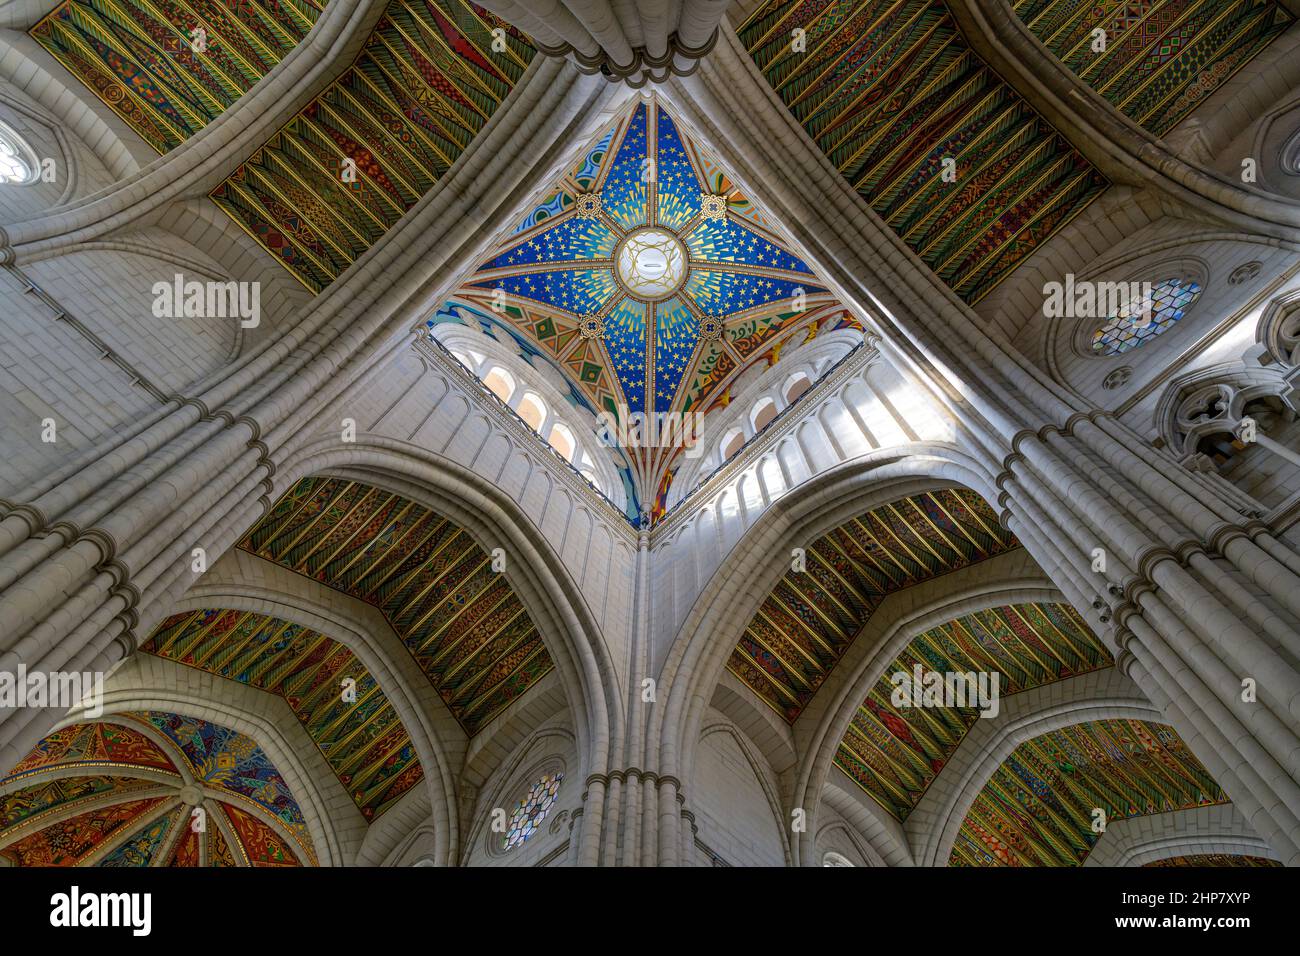 Interior of Almudena Cathedral - A low-angle interior view of the square cupola of Almudena Cathedral, Madrid, Spain. Stock Photo